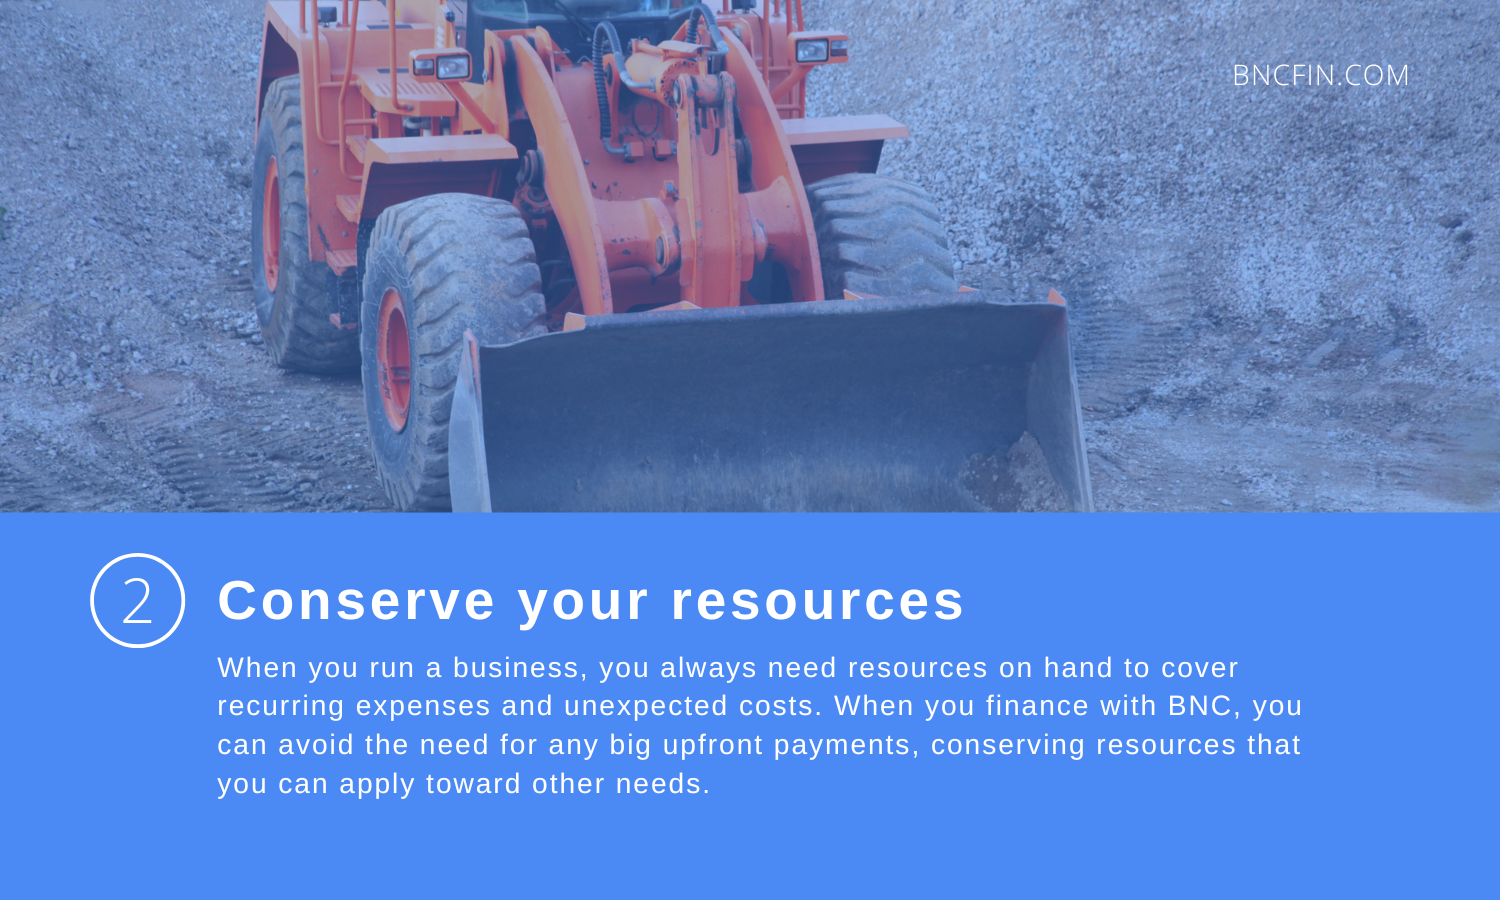 Conserve your resources.